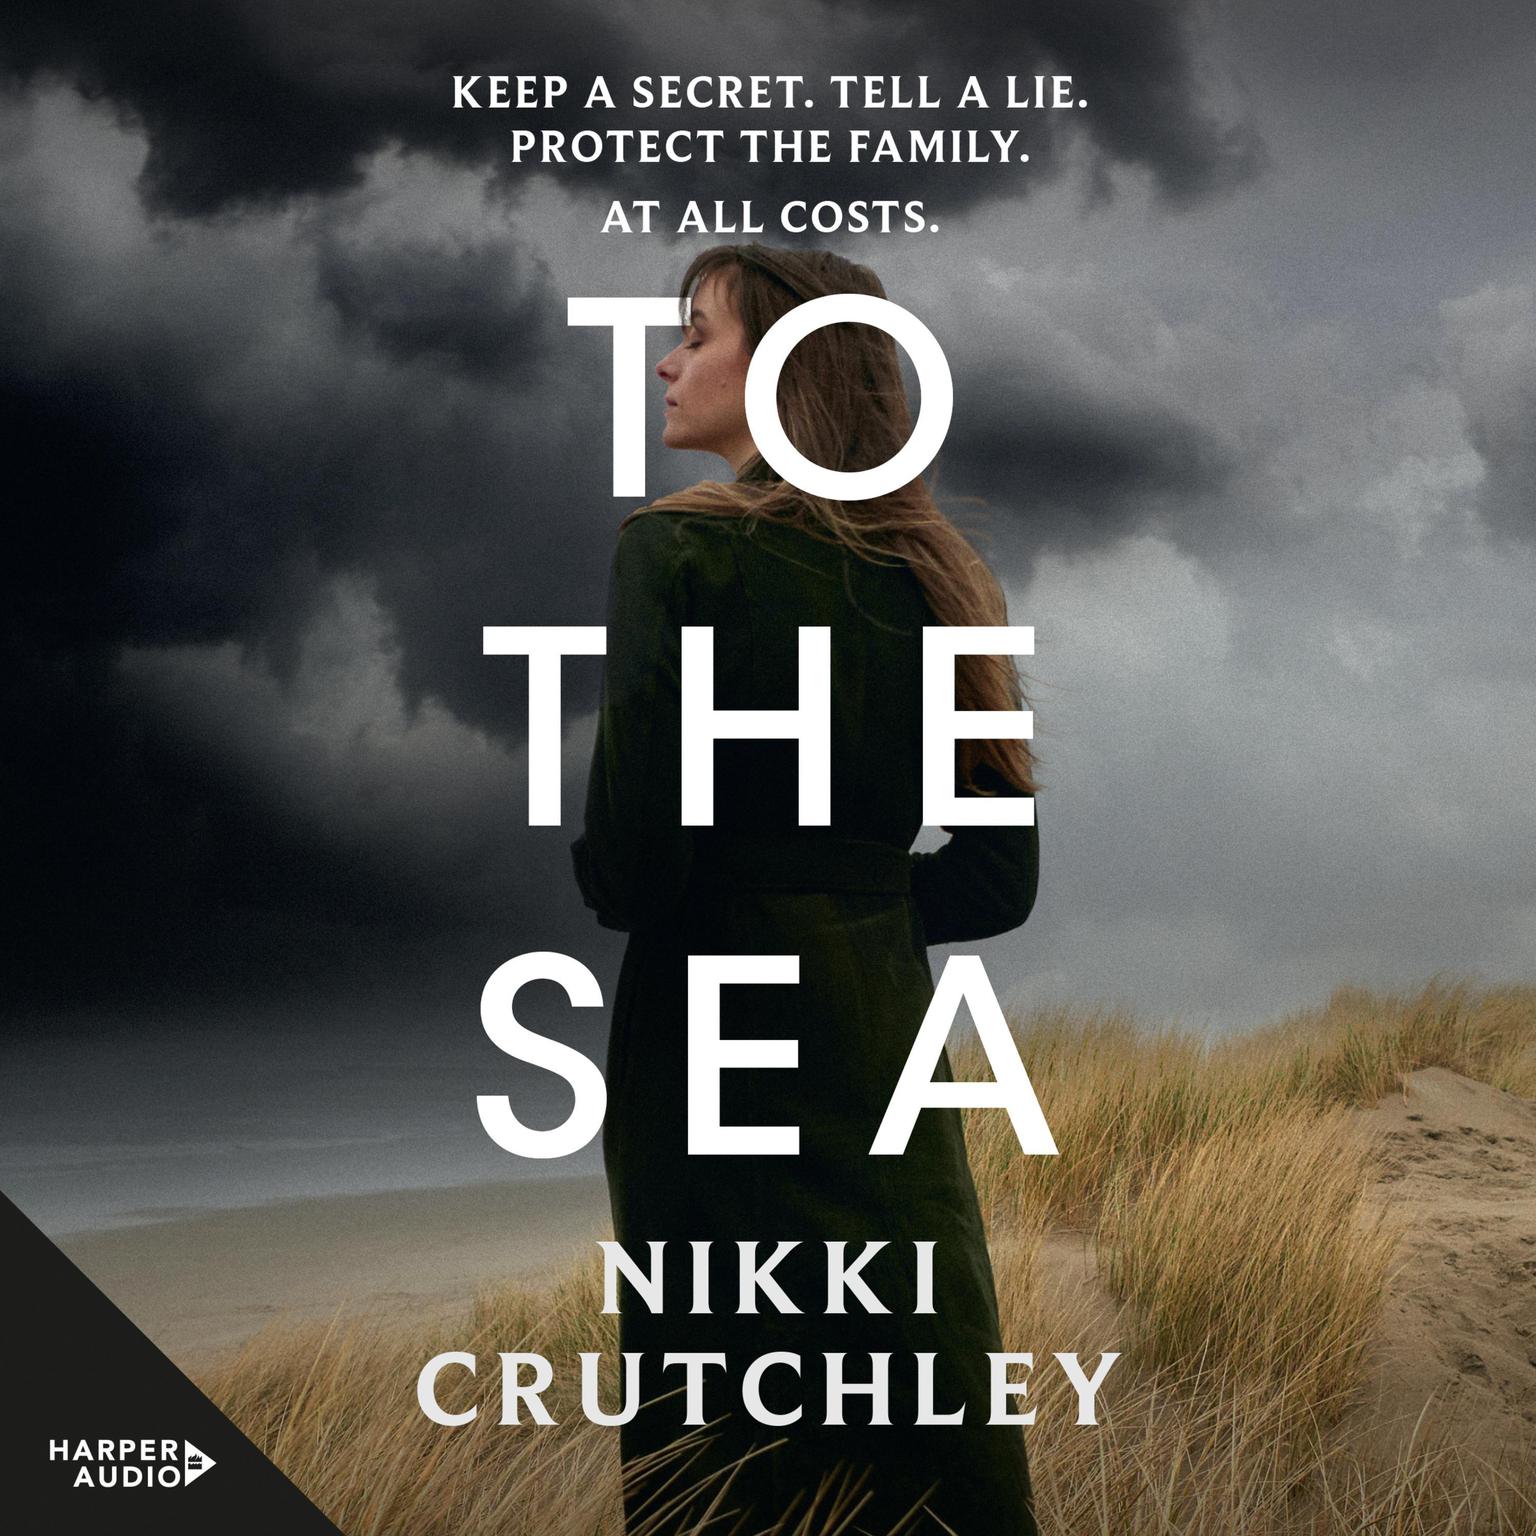 To the Sea Audiobook, by Nikki Crutchley